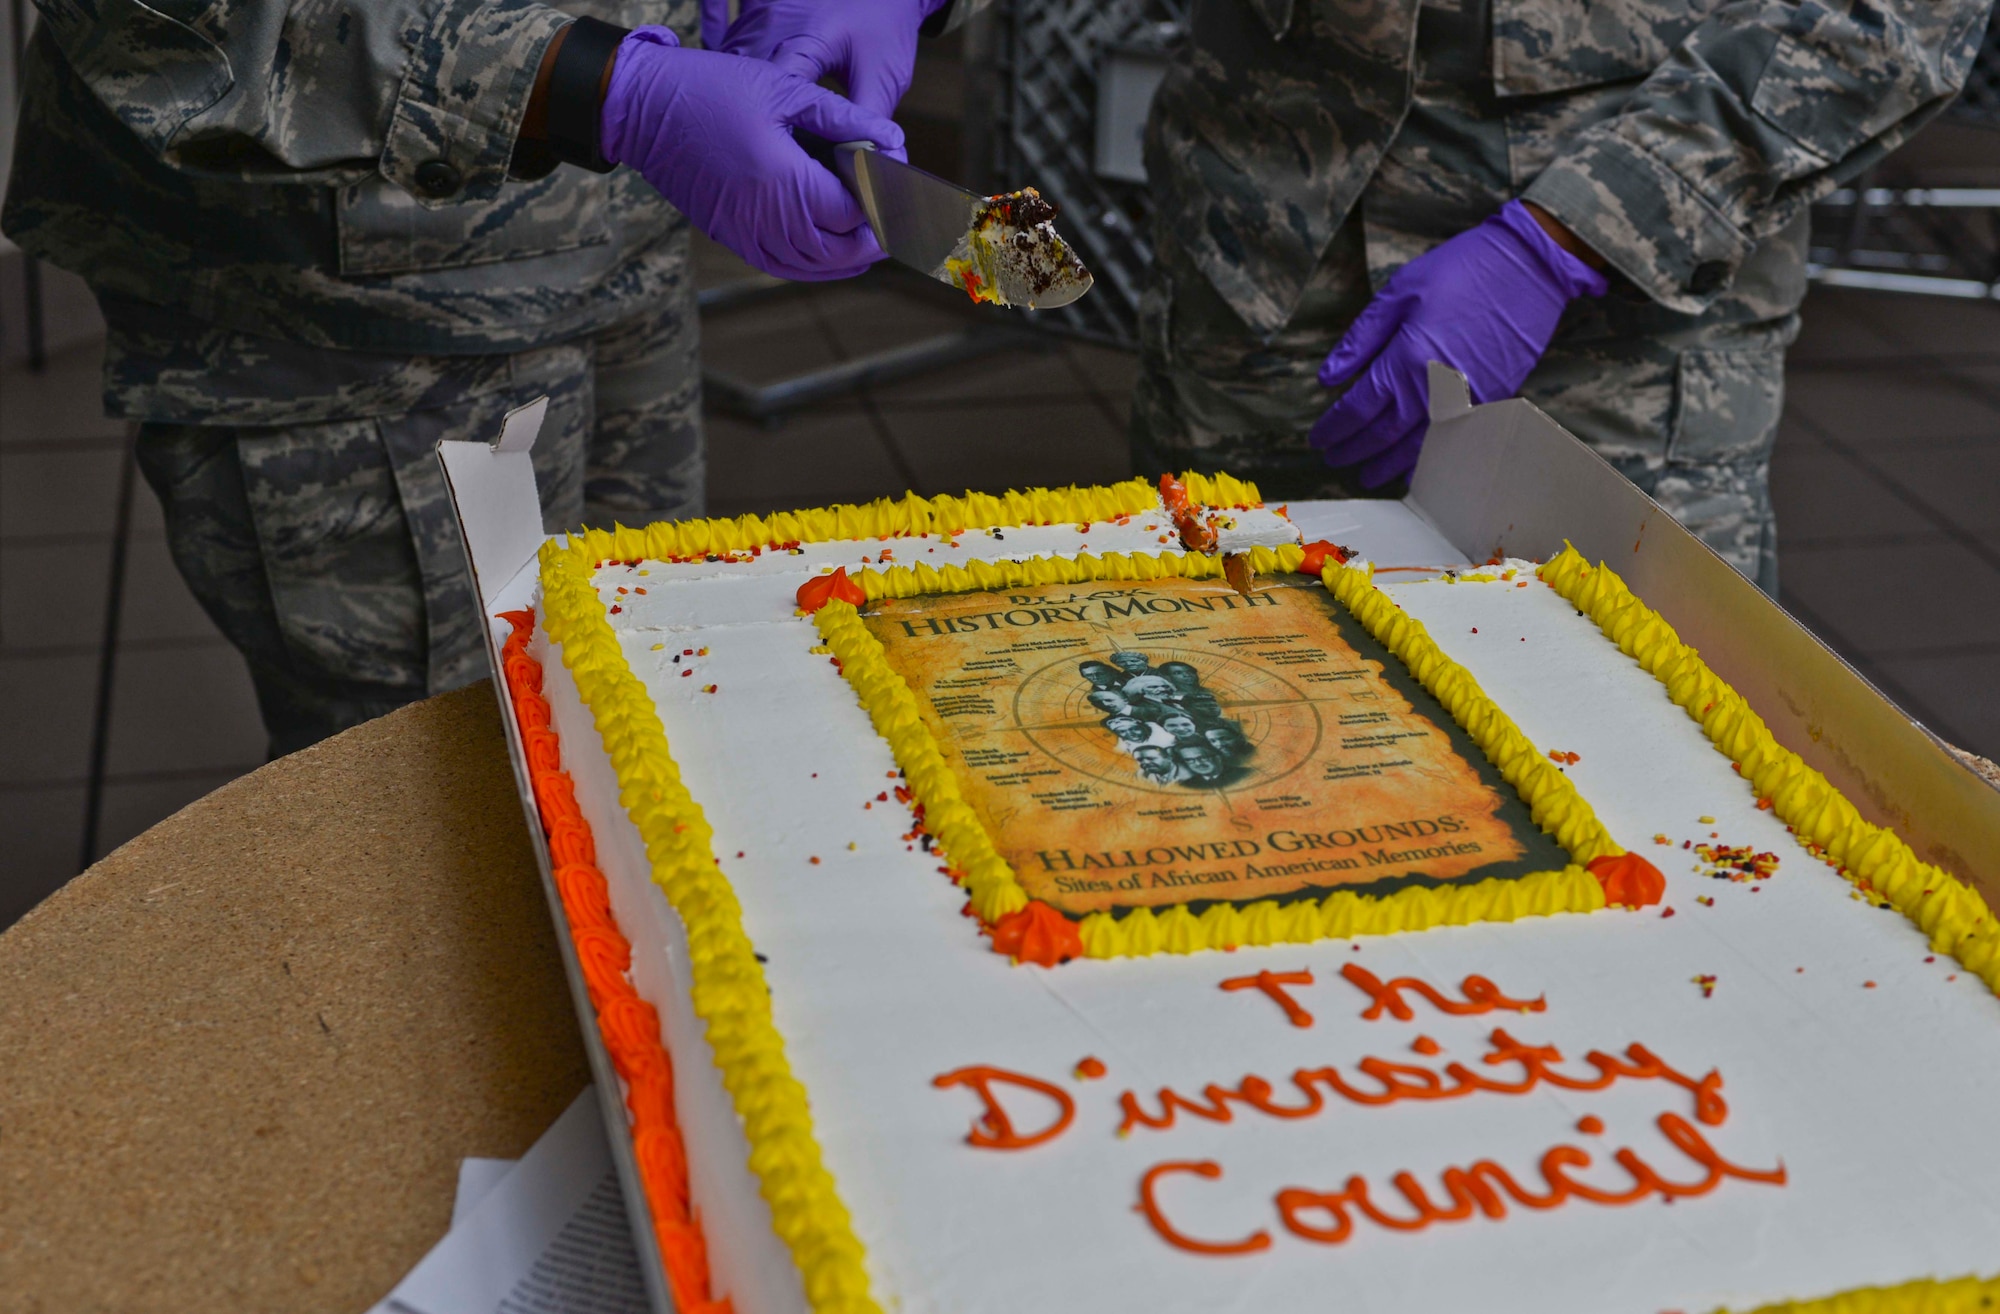 An Airman performs a cake cutting ceremony during a luncheon at Ellsworth Air Force Base, S.D., Feb. 24, 2016. The ceremony honored the accomplishments of African Americans for Black History Month and had more than 80 people in attendance. (U.S. Air Force photo by Airman Sadie Colbert/Released)